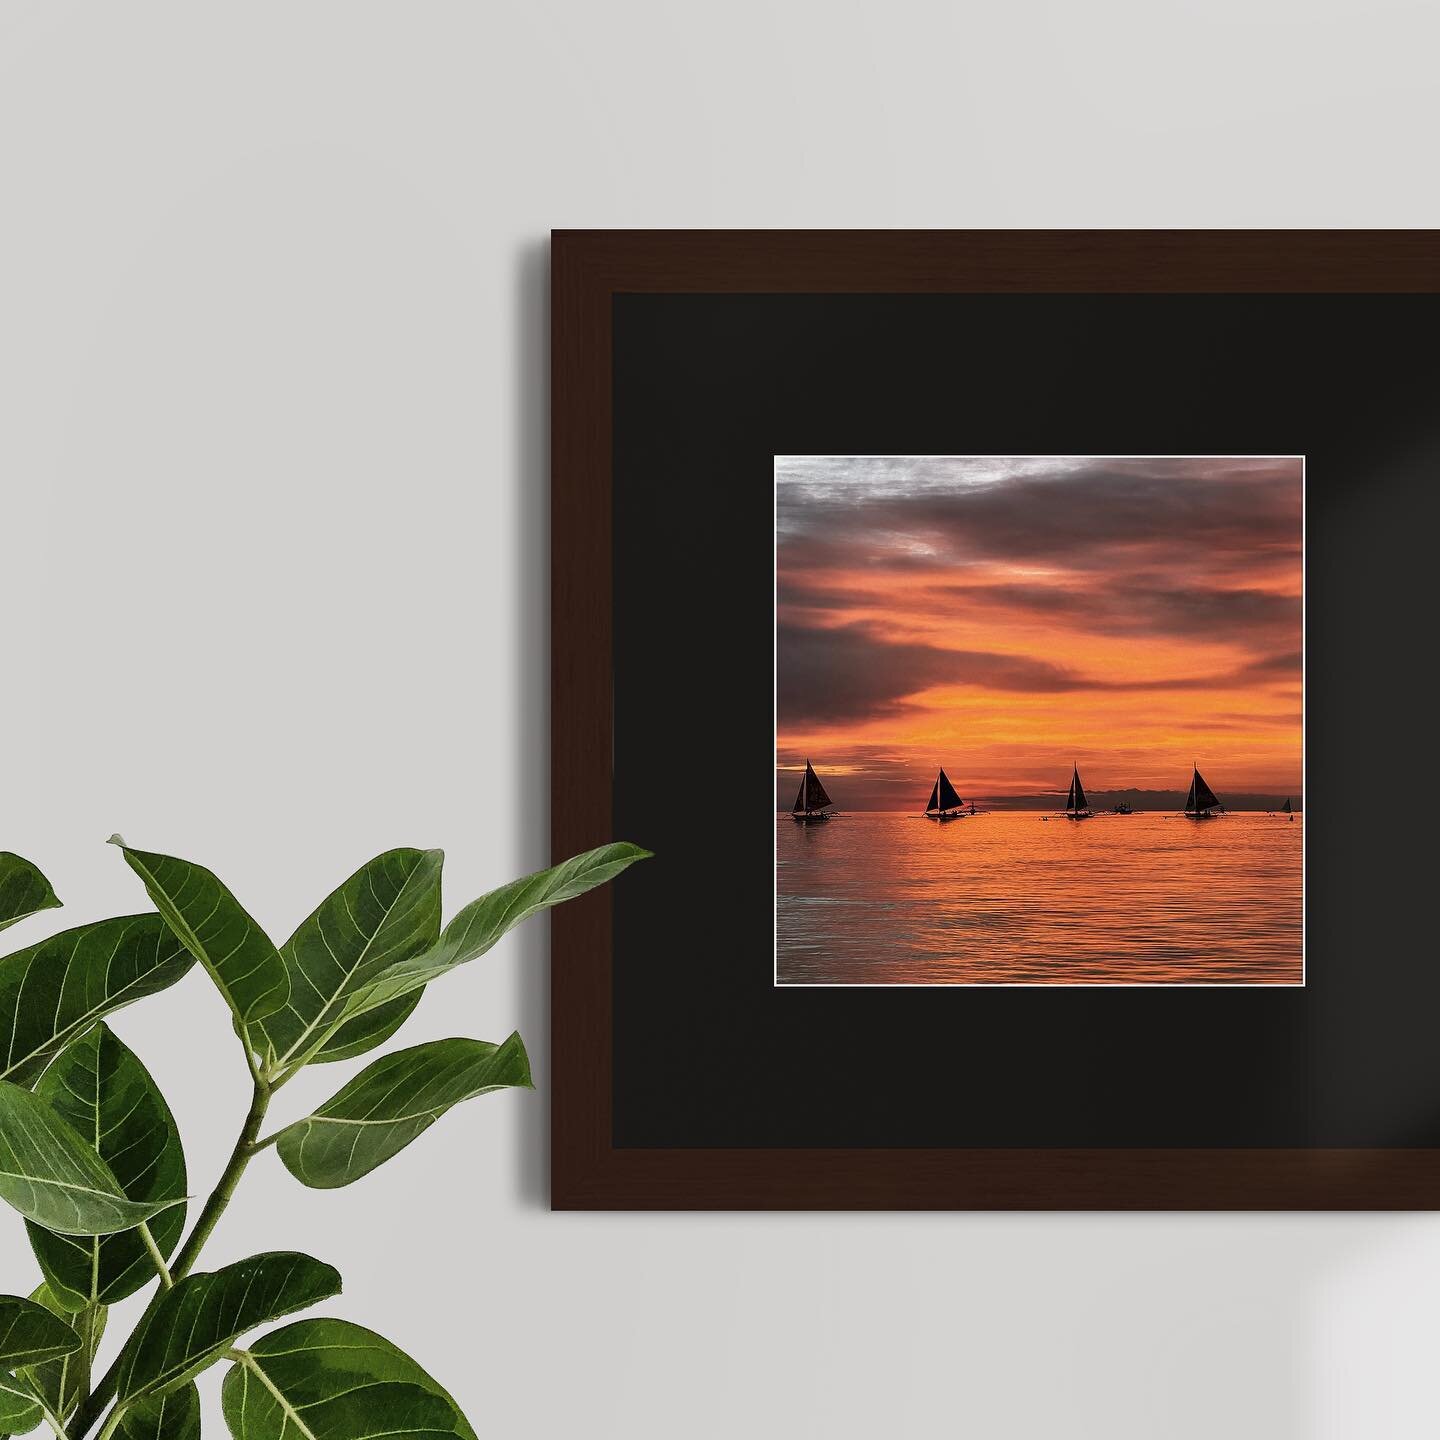 Framed Photo of Paraw (Sail) Boats in Boracay, Philippines printed on Fine Art Paper Velvet protected by Premium Clear Acrylic Glass. Available in rich walnut frame paired with black mat.
-
#boracay #philippines #print #walldecor #homedecor #framedpr